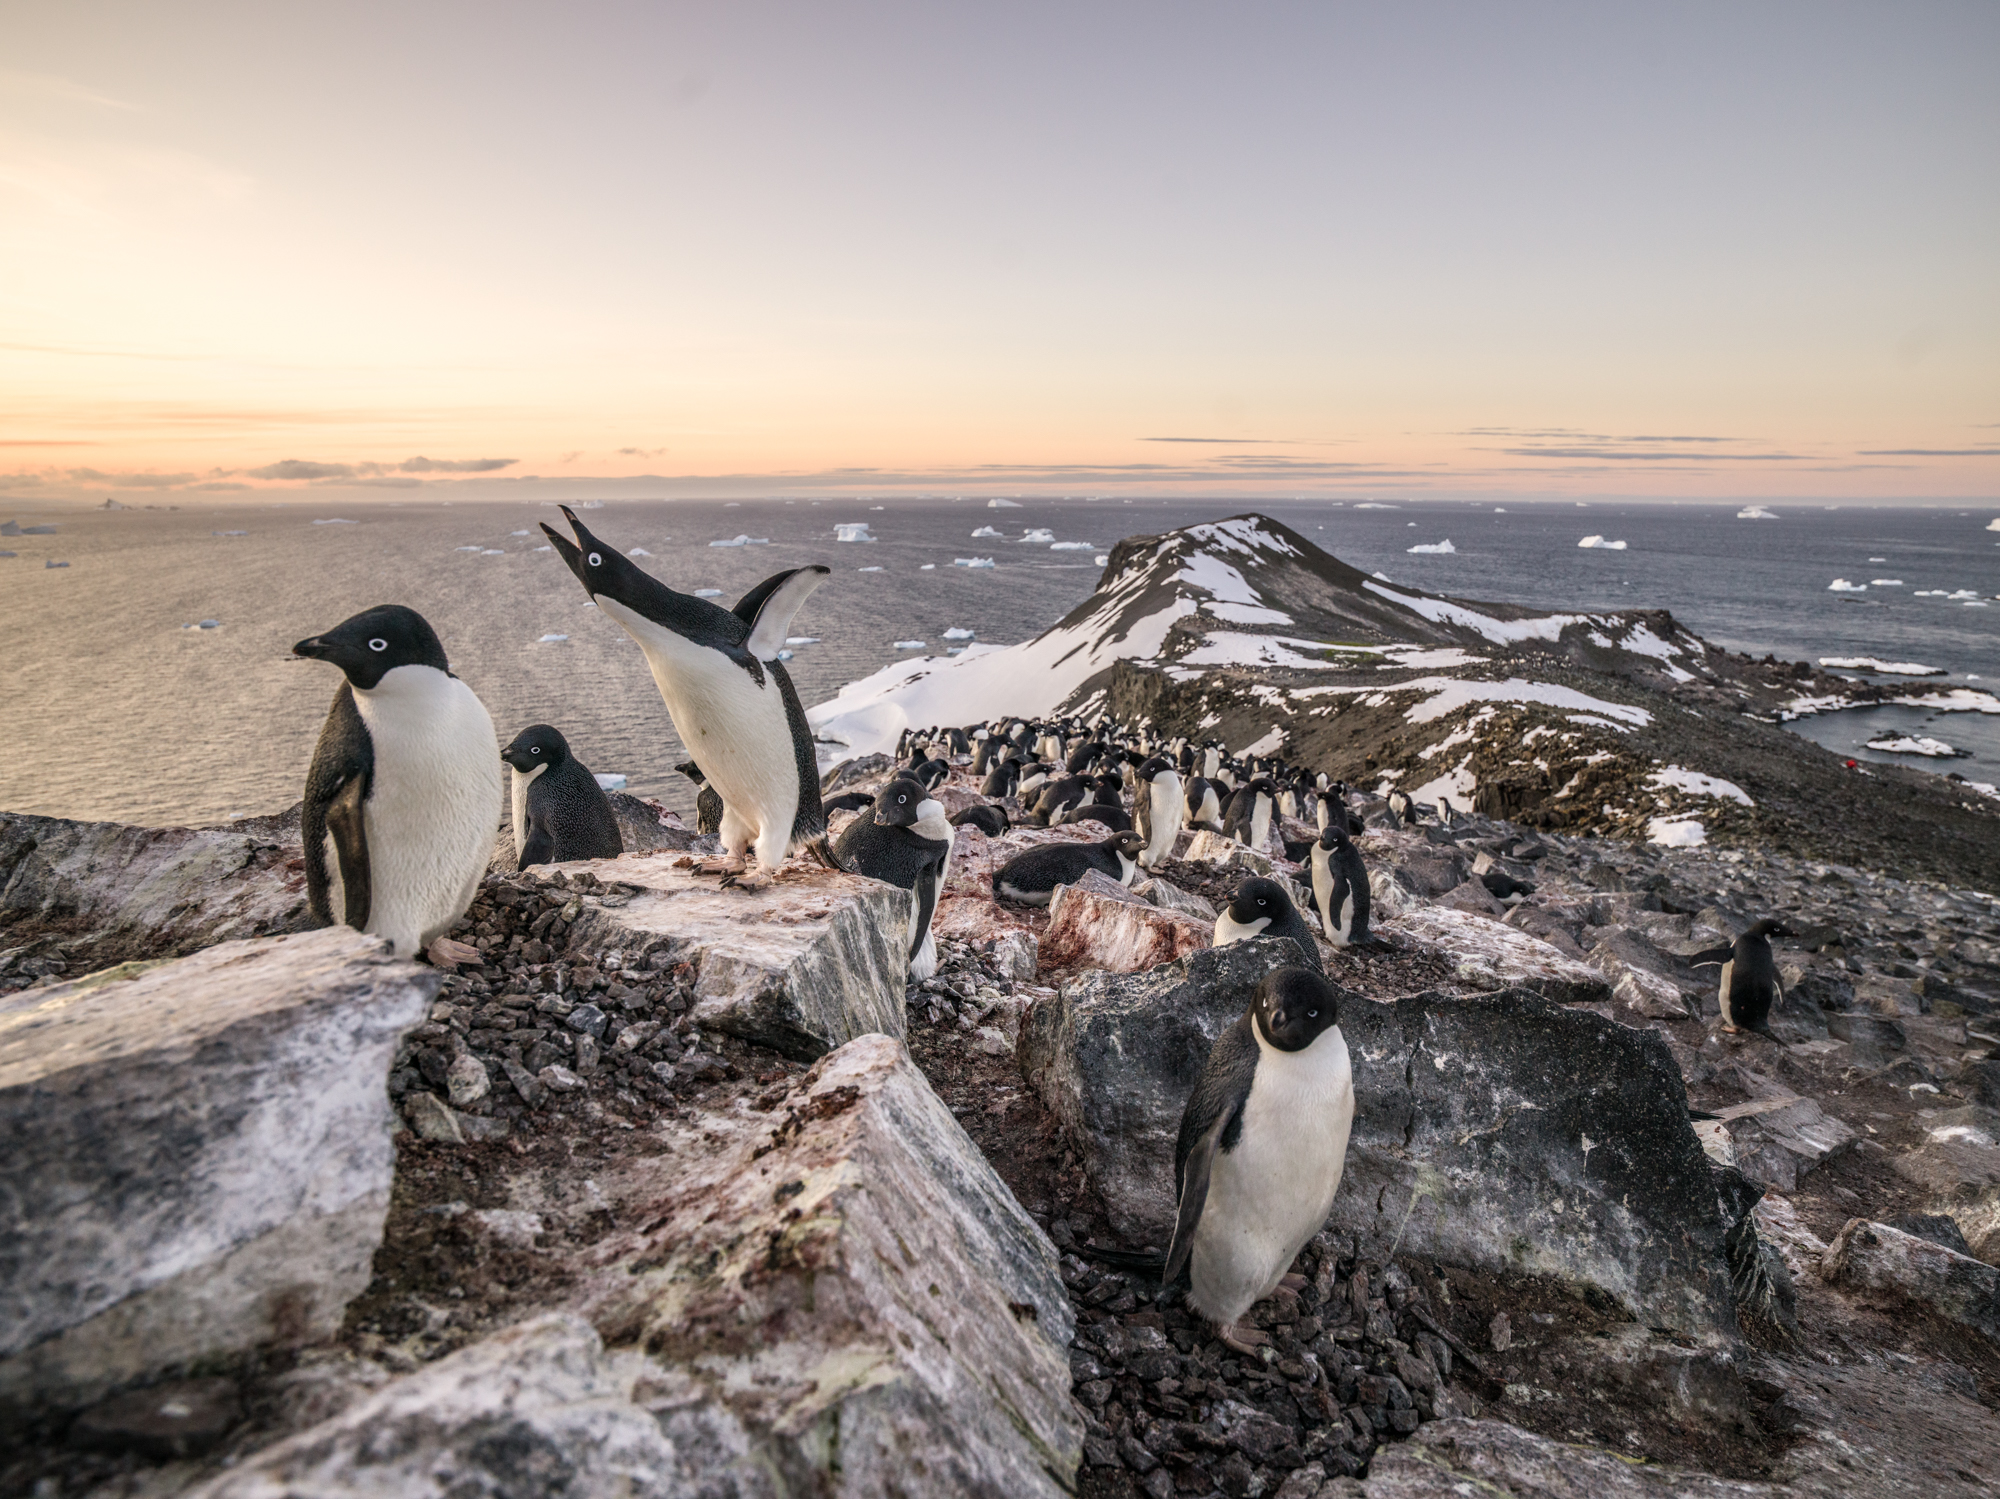   Astrolab Island, Antarctica  - Adelie Penguins are Antartica’s smallest penguin and mostly threatened by climate change.  They feed mainly on krill and small fish, and are important as a food source for predators such as killer whales and leopard s